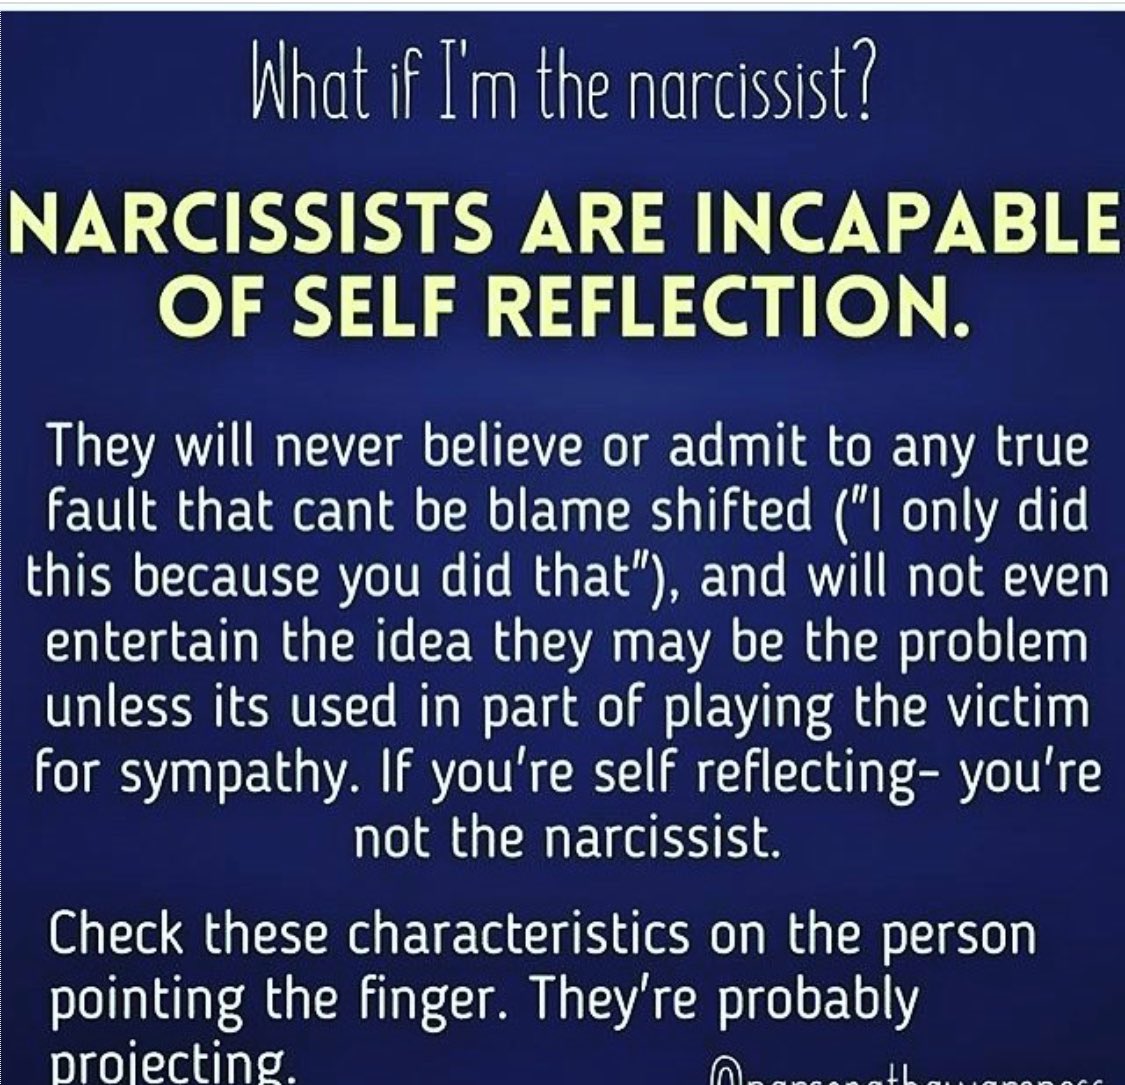 X \ Narcissist Sociopath Awareness على X: "They'll frequently shift the blame &amp; cause you to second guess your own behavior &amp; intentions. Remember you are. https://t.co/XY0jrtUlAp"